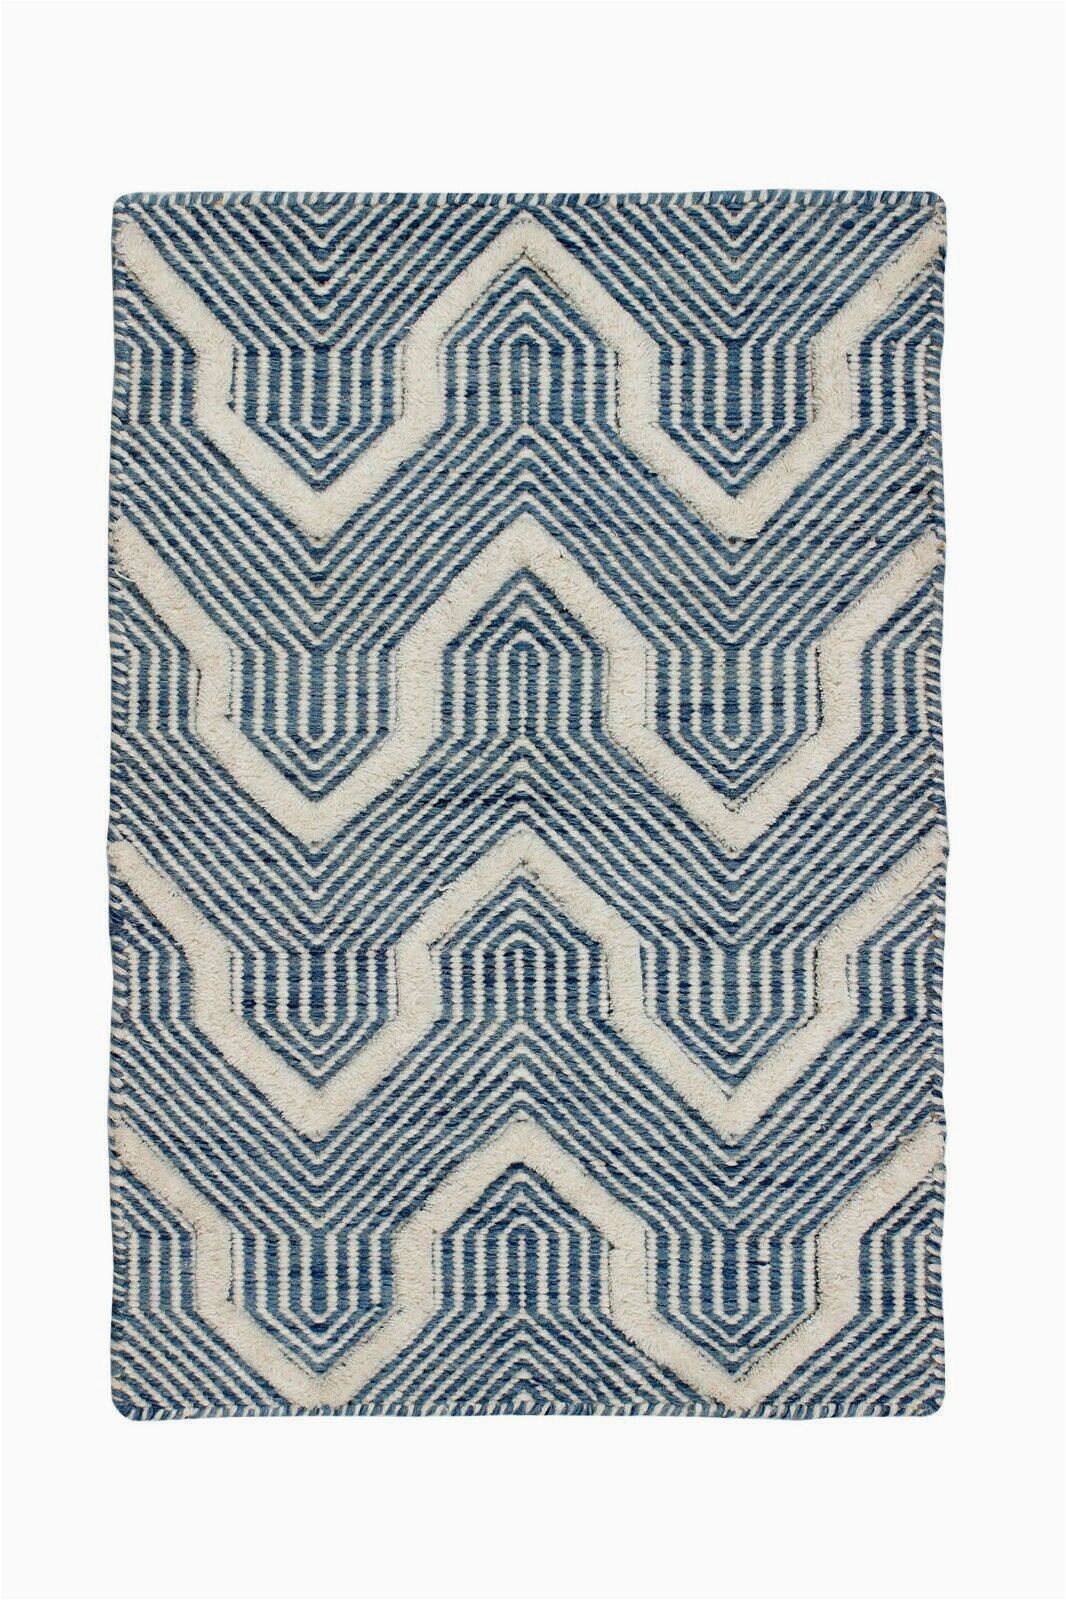 Area Rugs 60 X 90 Details About Handmade Flat Weave Wool area Rug Indian Carpet Front Mat 60×90 Cm Floor Rugs